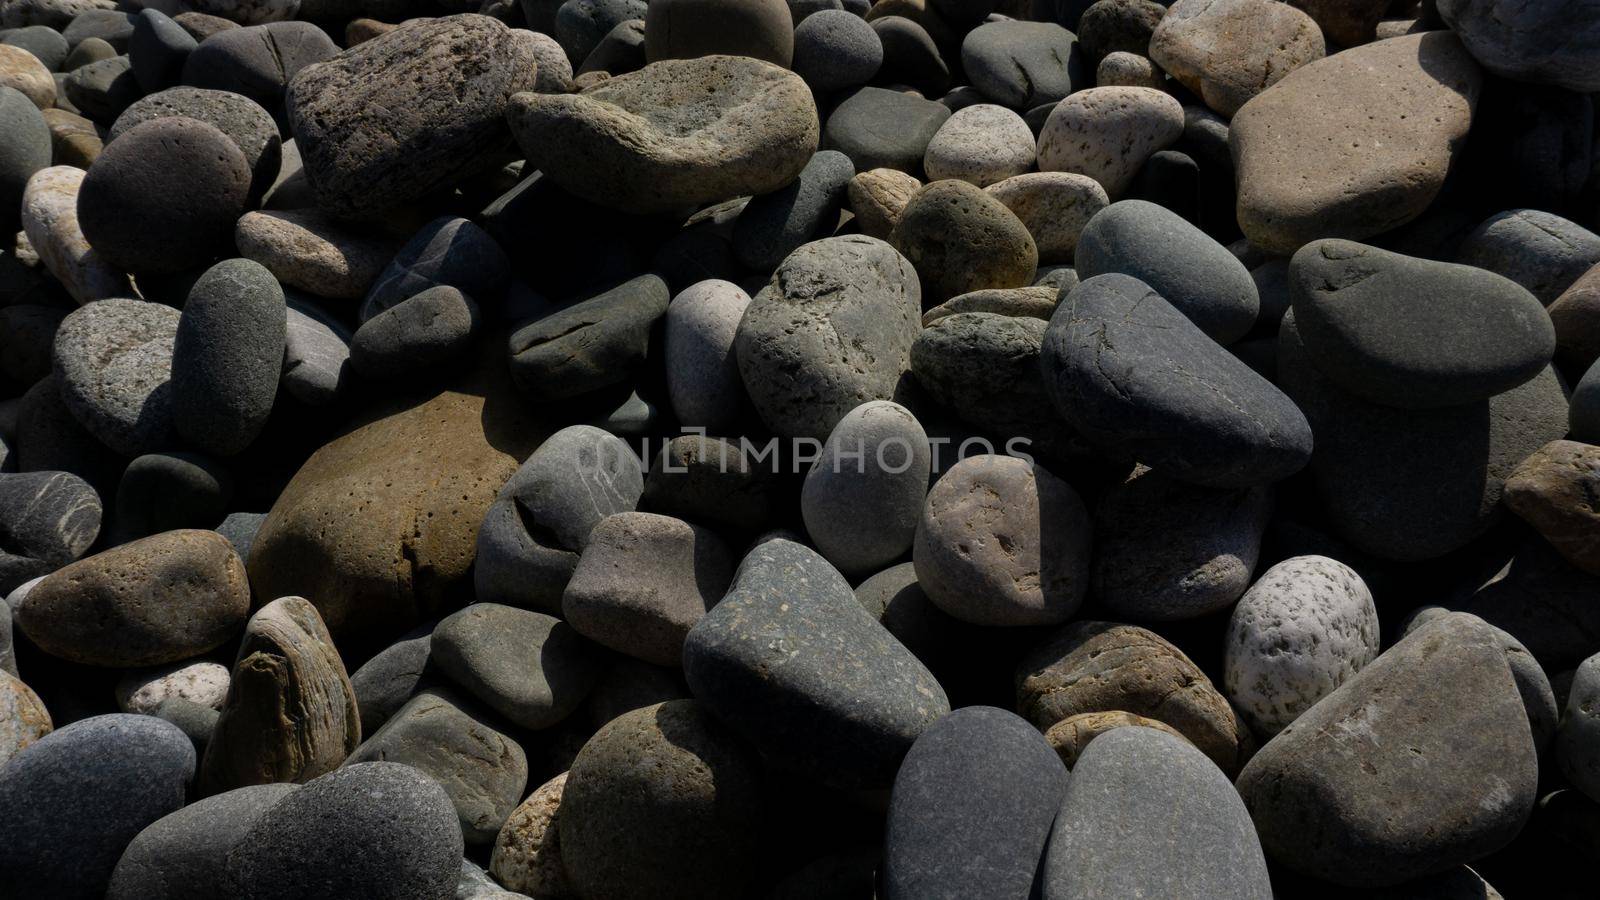 Sea stones background with small pebbles or stone in garden or in the seaside or on a beach. A close up view of rounded smooth polished pebble stones by Asnia